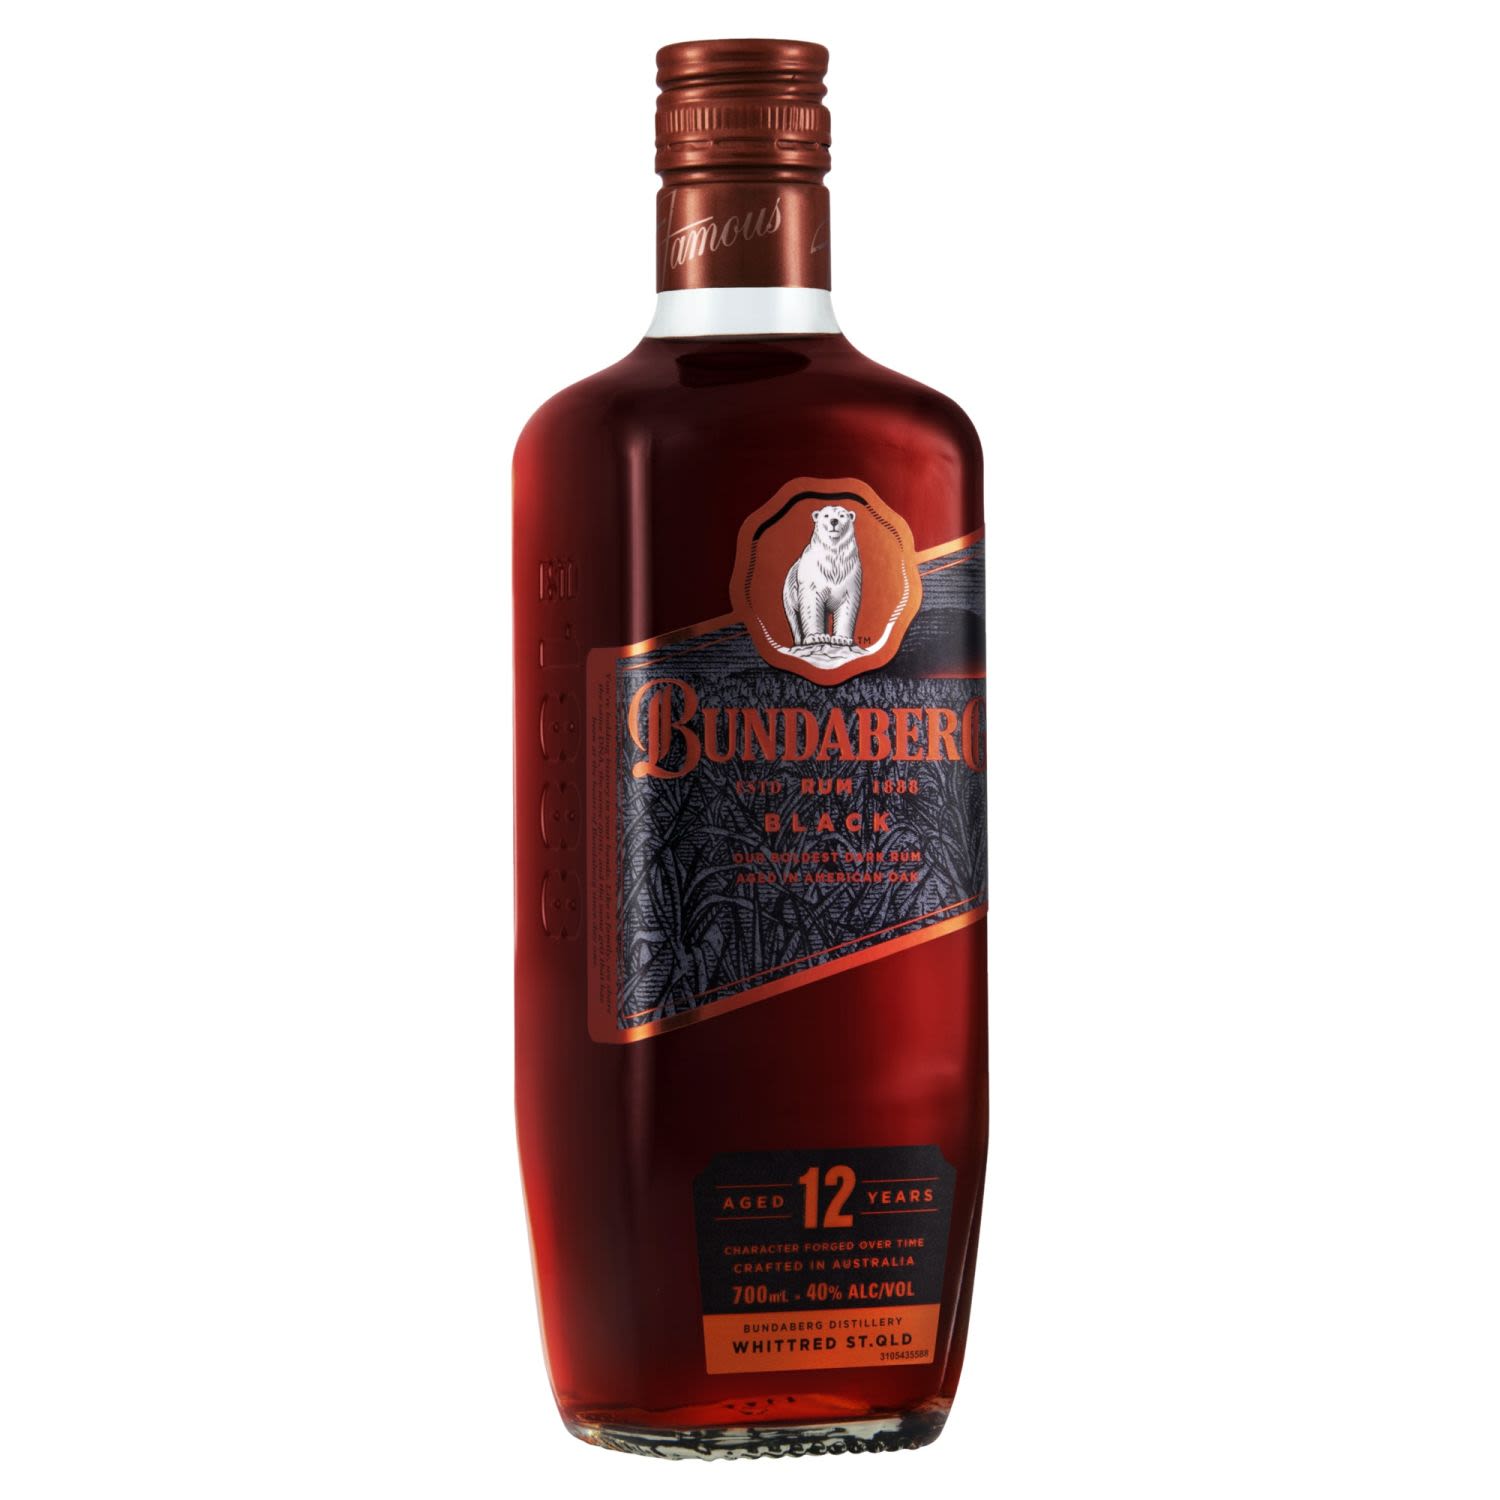 The magical deep red glow of the Bundaberg Black 12-year-old is a result from the careful ageing process in the distillery. The flavours of warming aromatic clove, nutmeg and rich molasses, which develops into a raisin and honeyed oak finish.<br /> <br />Alcohol Volume: 40.00%<br /><br />Pack Format: Bottle<br /><br />Standard Drinks: 22</br /><br />Pack Type: Bottle<br /><br />Country of Origin: Australia<br />